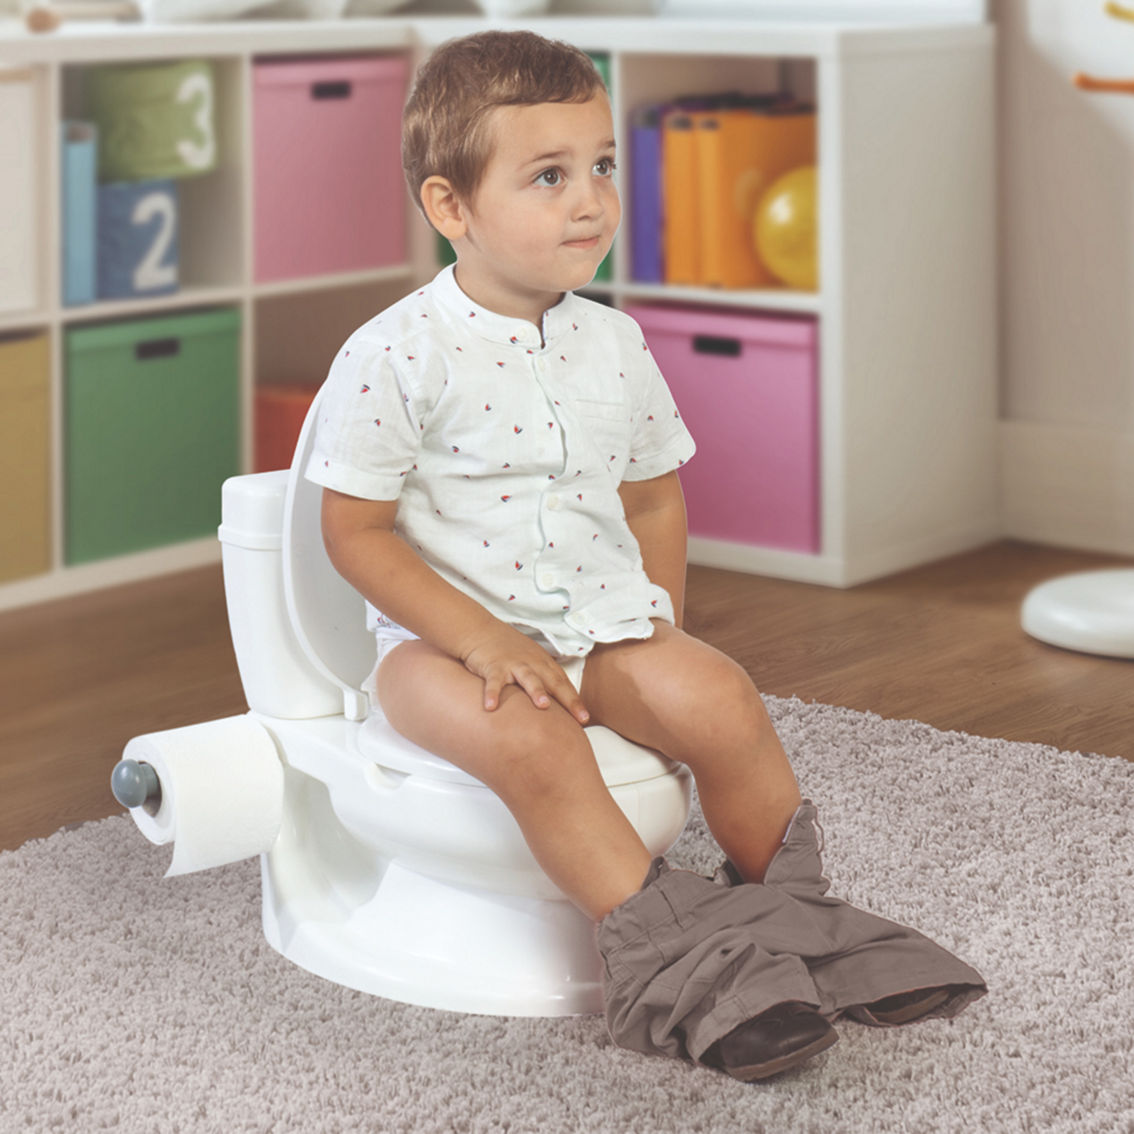 Dolu Educational Potty Training Toilet for Kids 18 Months+ with Anti-Slip - Image 4 of 4